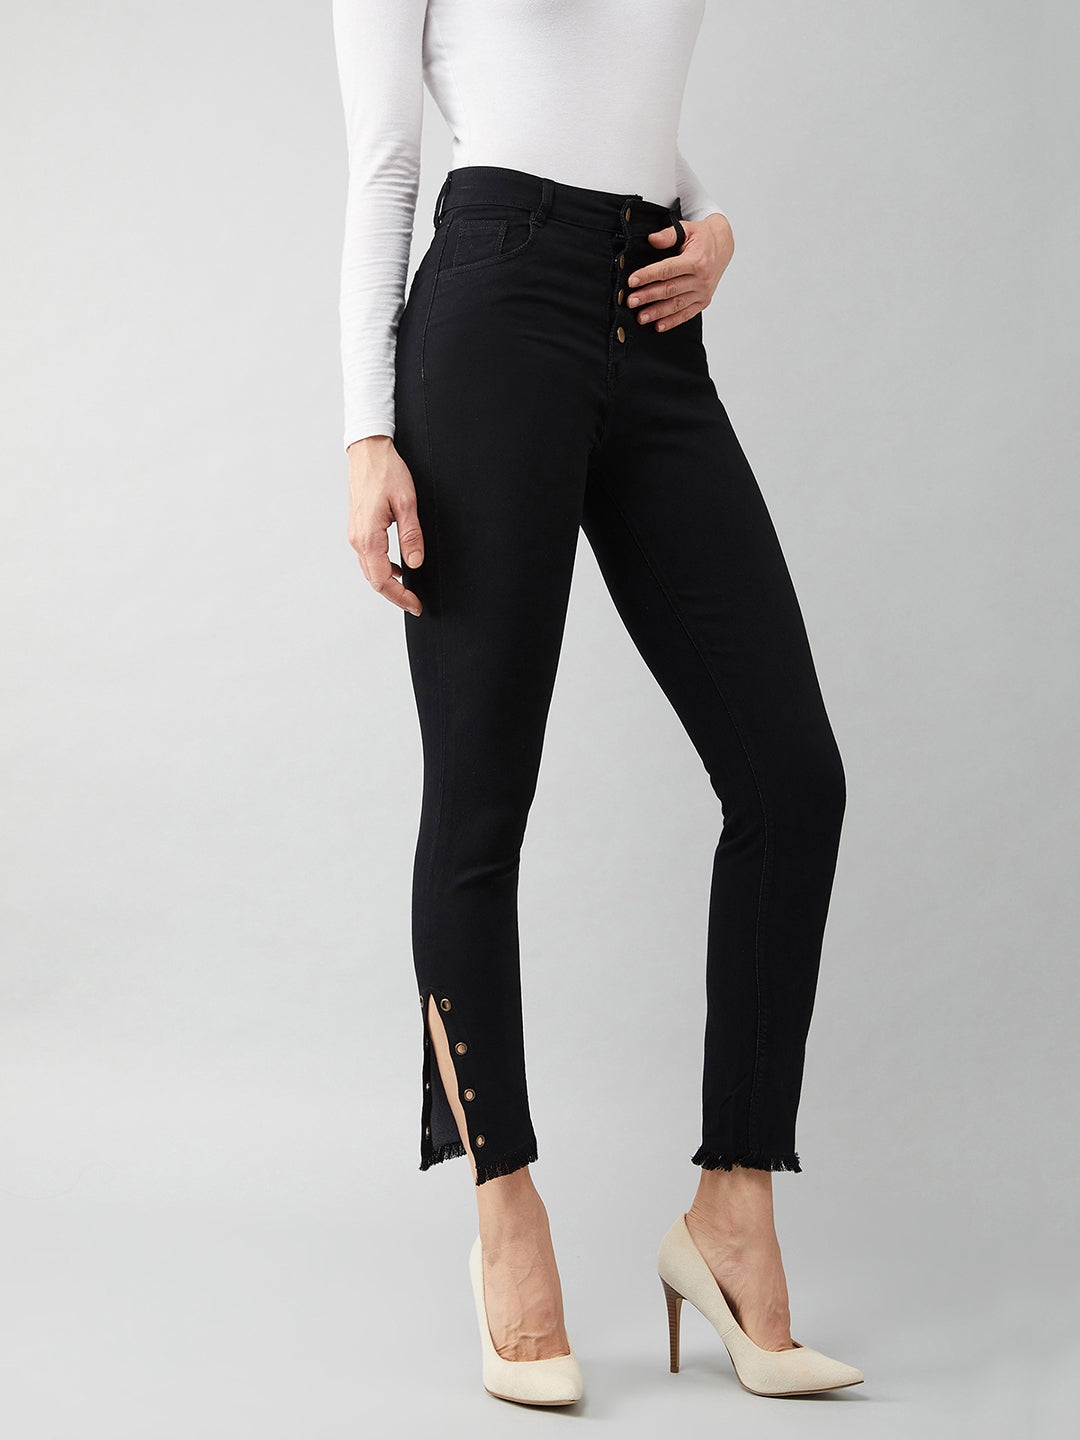 MISS CHASE | Black Skinny Fit Relaxed High Rise Regular Length Denim Stretchable Jeans